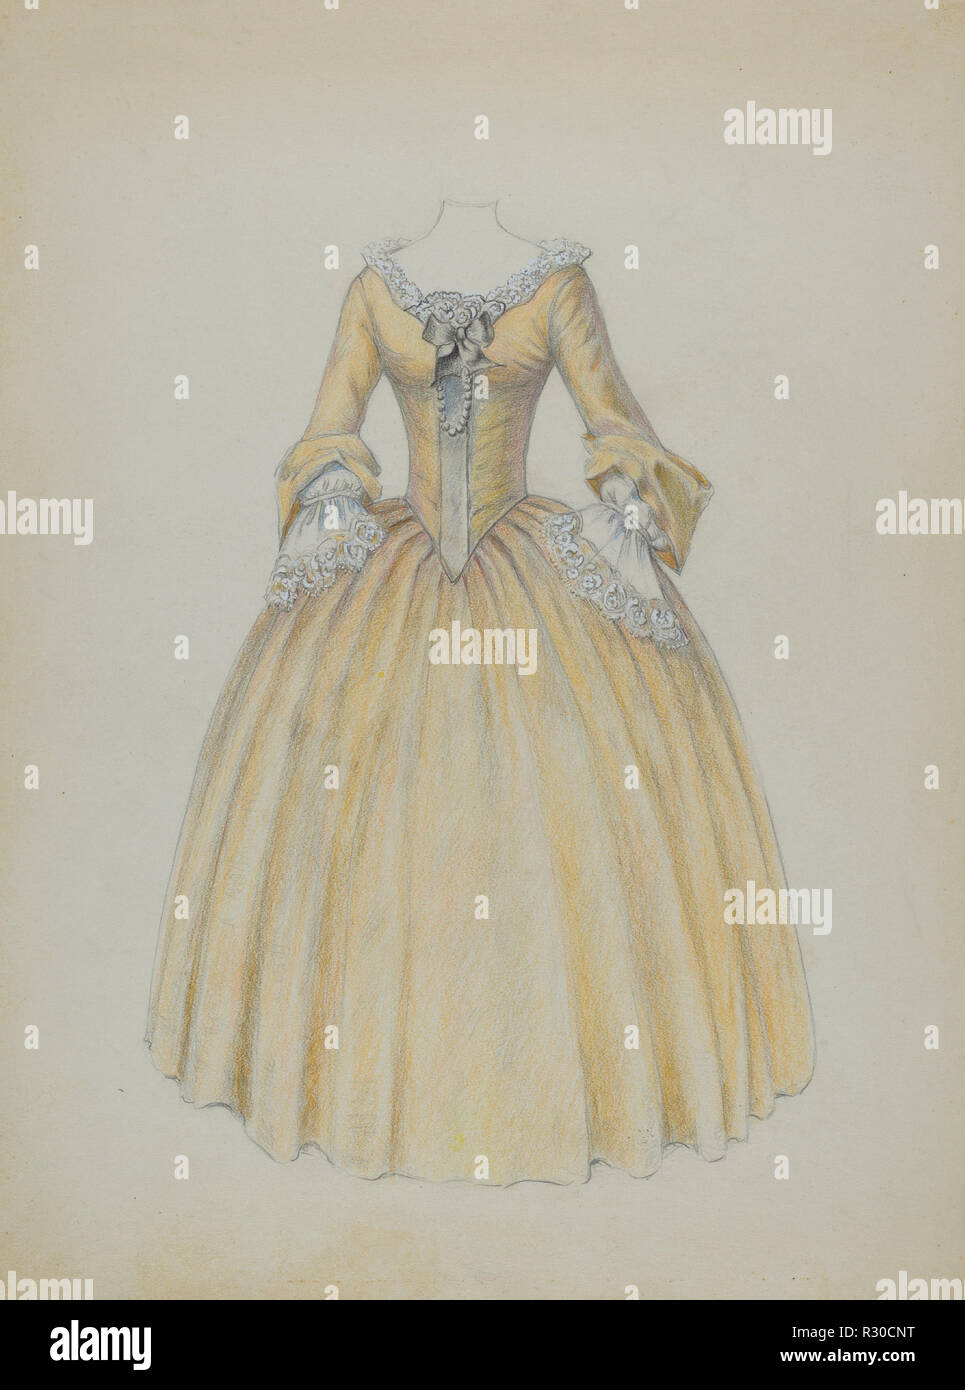 Dress. Dated: c. 1940. Dimensions: overall: 30.5 x 22.8 cm (12 x 9 in.). Medium: graphite, colored pencil, and gouache on paper. Museum: National Gallery of Art, Washington DC. Author: Jessie M. Benge. Stock Photo